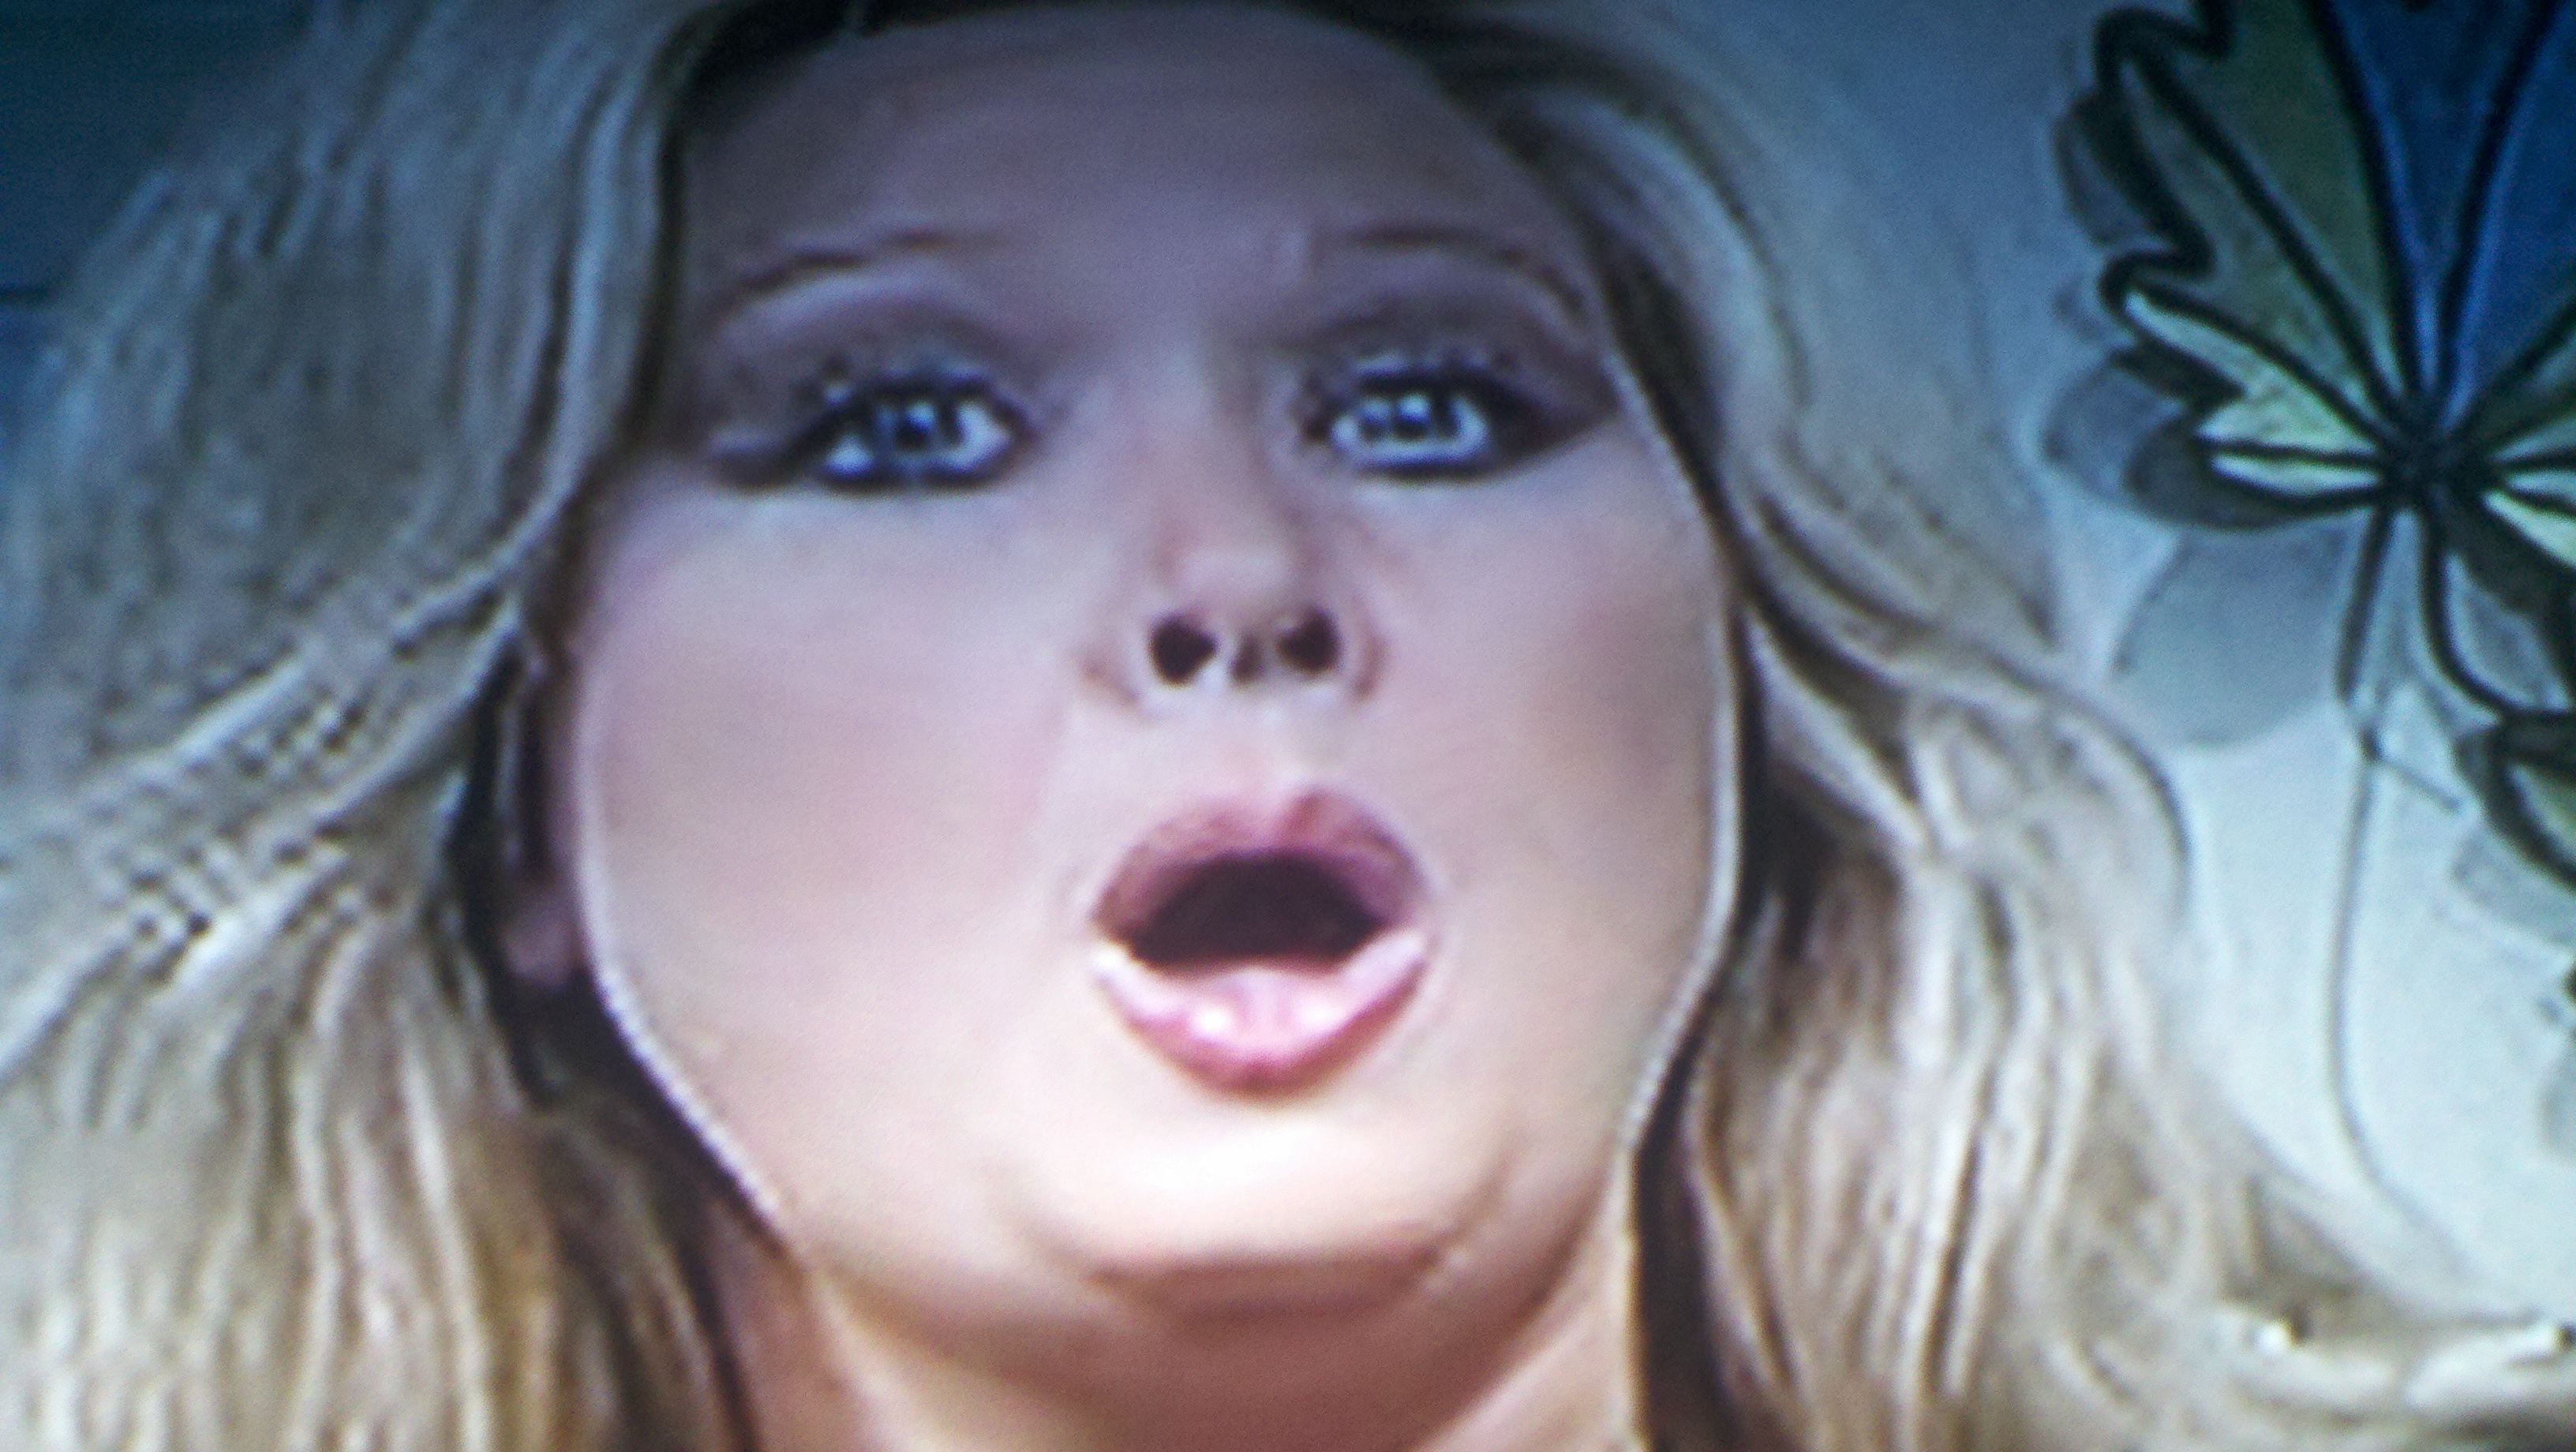 Video: Woman With Three Nostrils On Live TV?